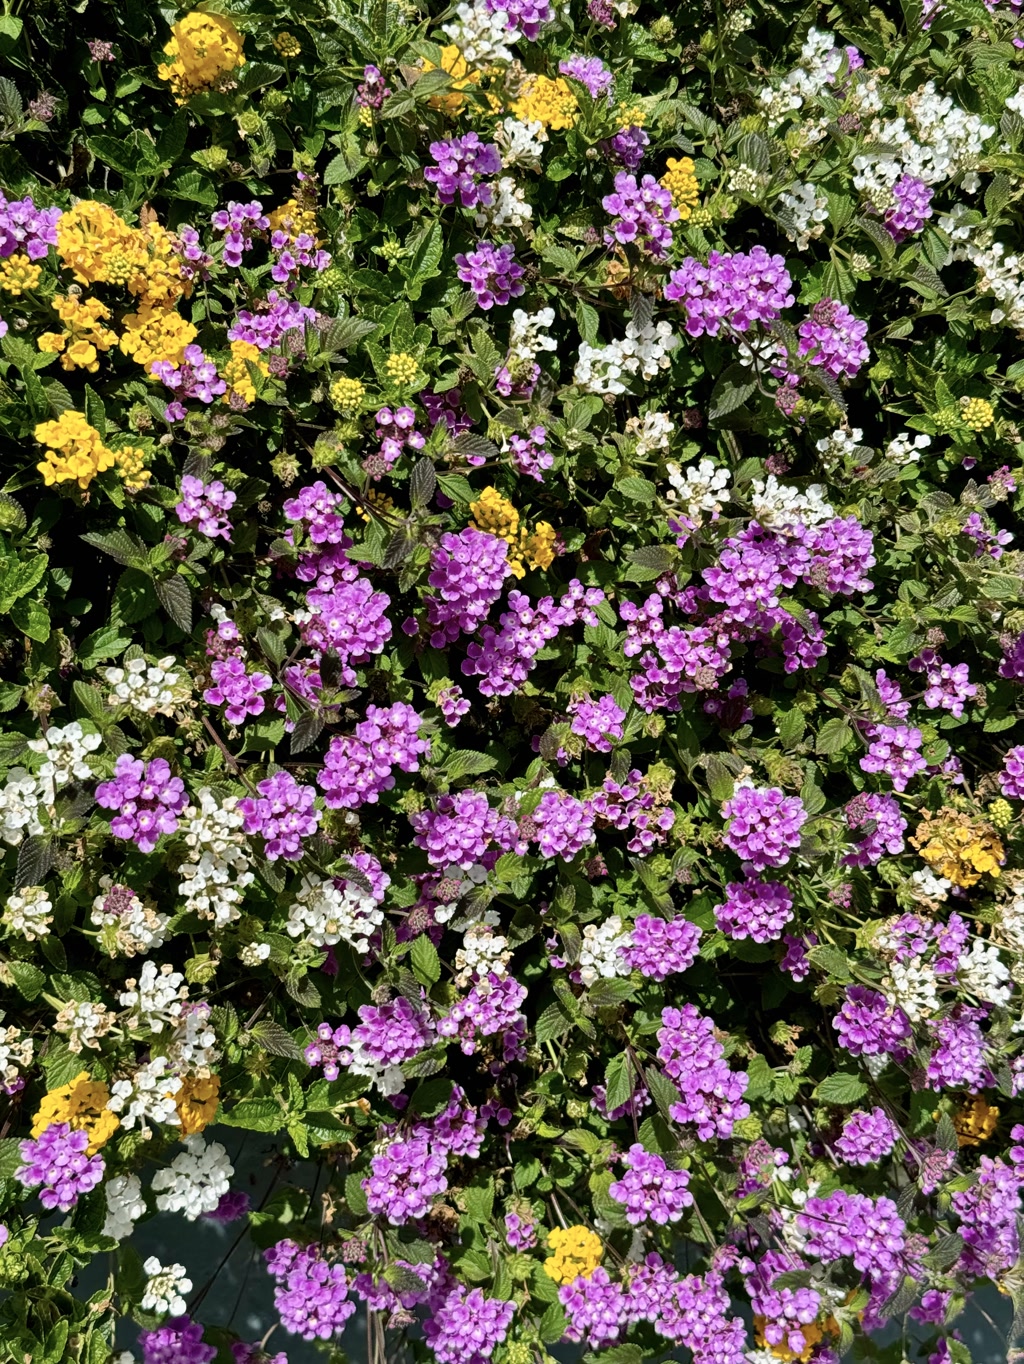 A vibrant display of clustered flowers showcasing various shades of purple, white, and yellow. The flowers, which appear to belong to the Lantana species, are dense and form a colorful tapestry with rich green foliage peeping through them. The yellow flowers add a bright contrast to the dominant purple hues, while the white blossoms provide a neutral balance, creating a visually appealing mixture of colors and textures.